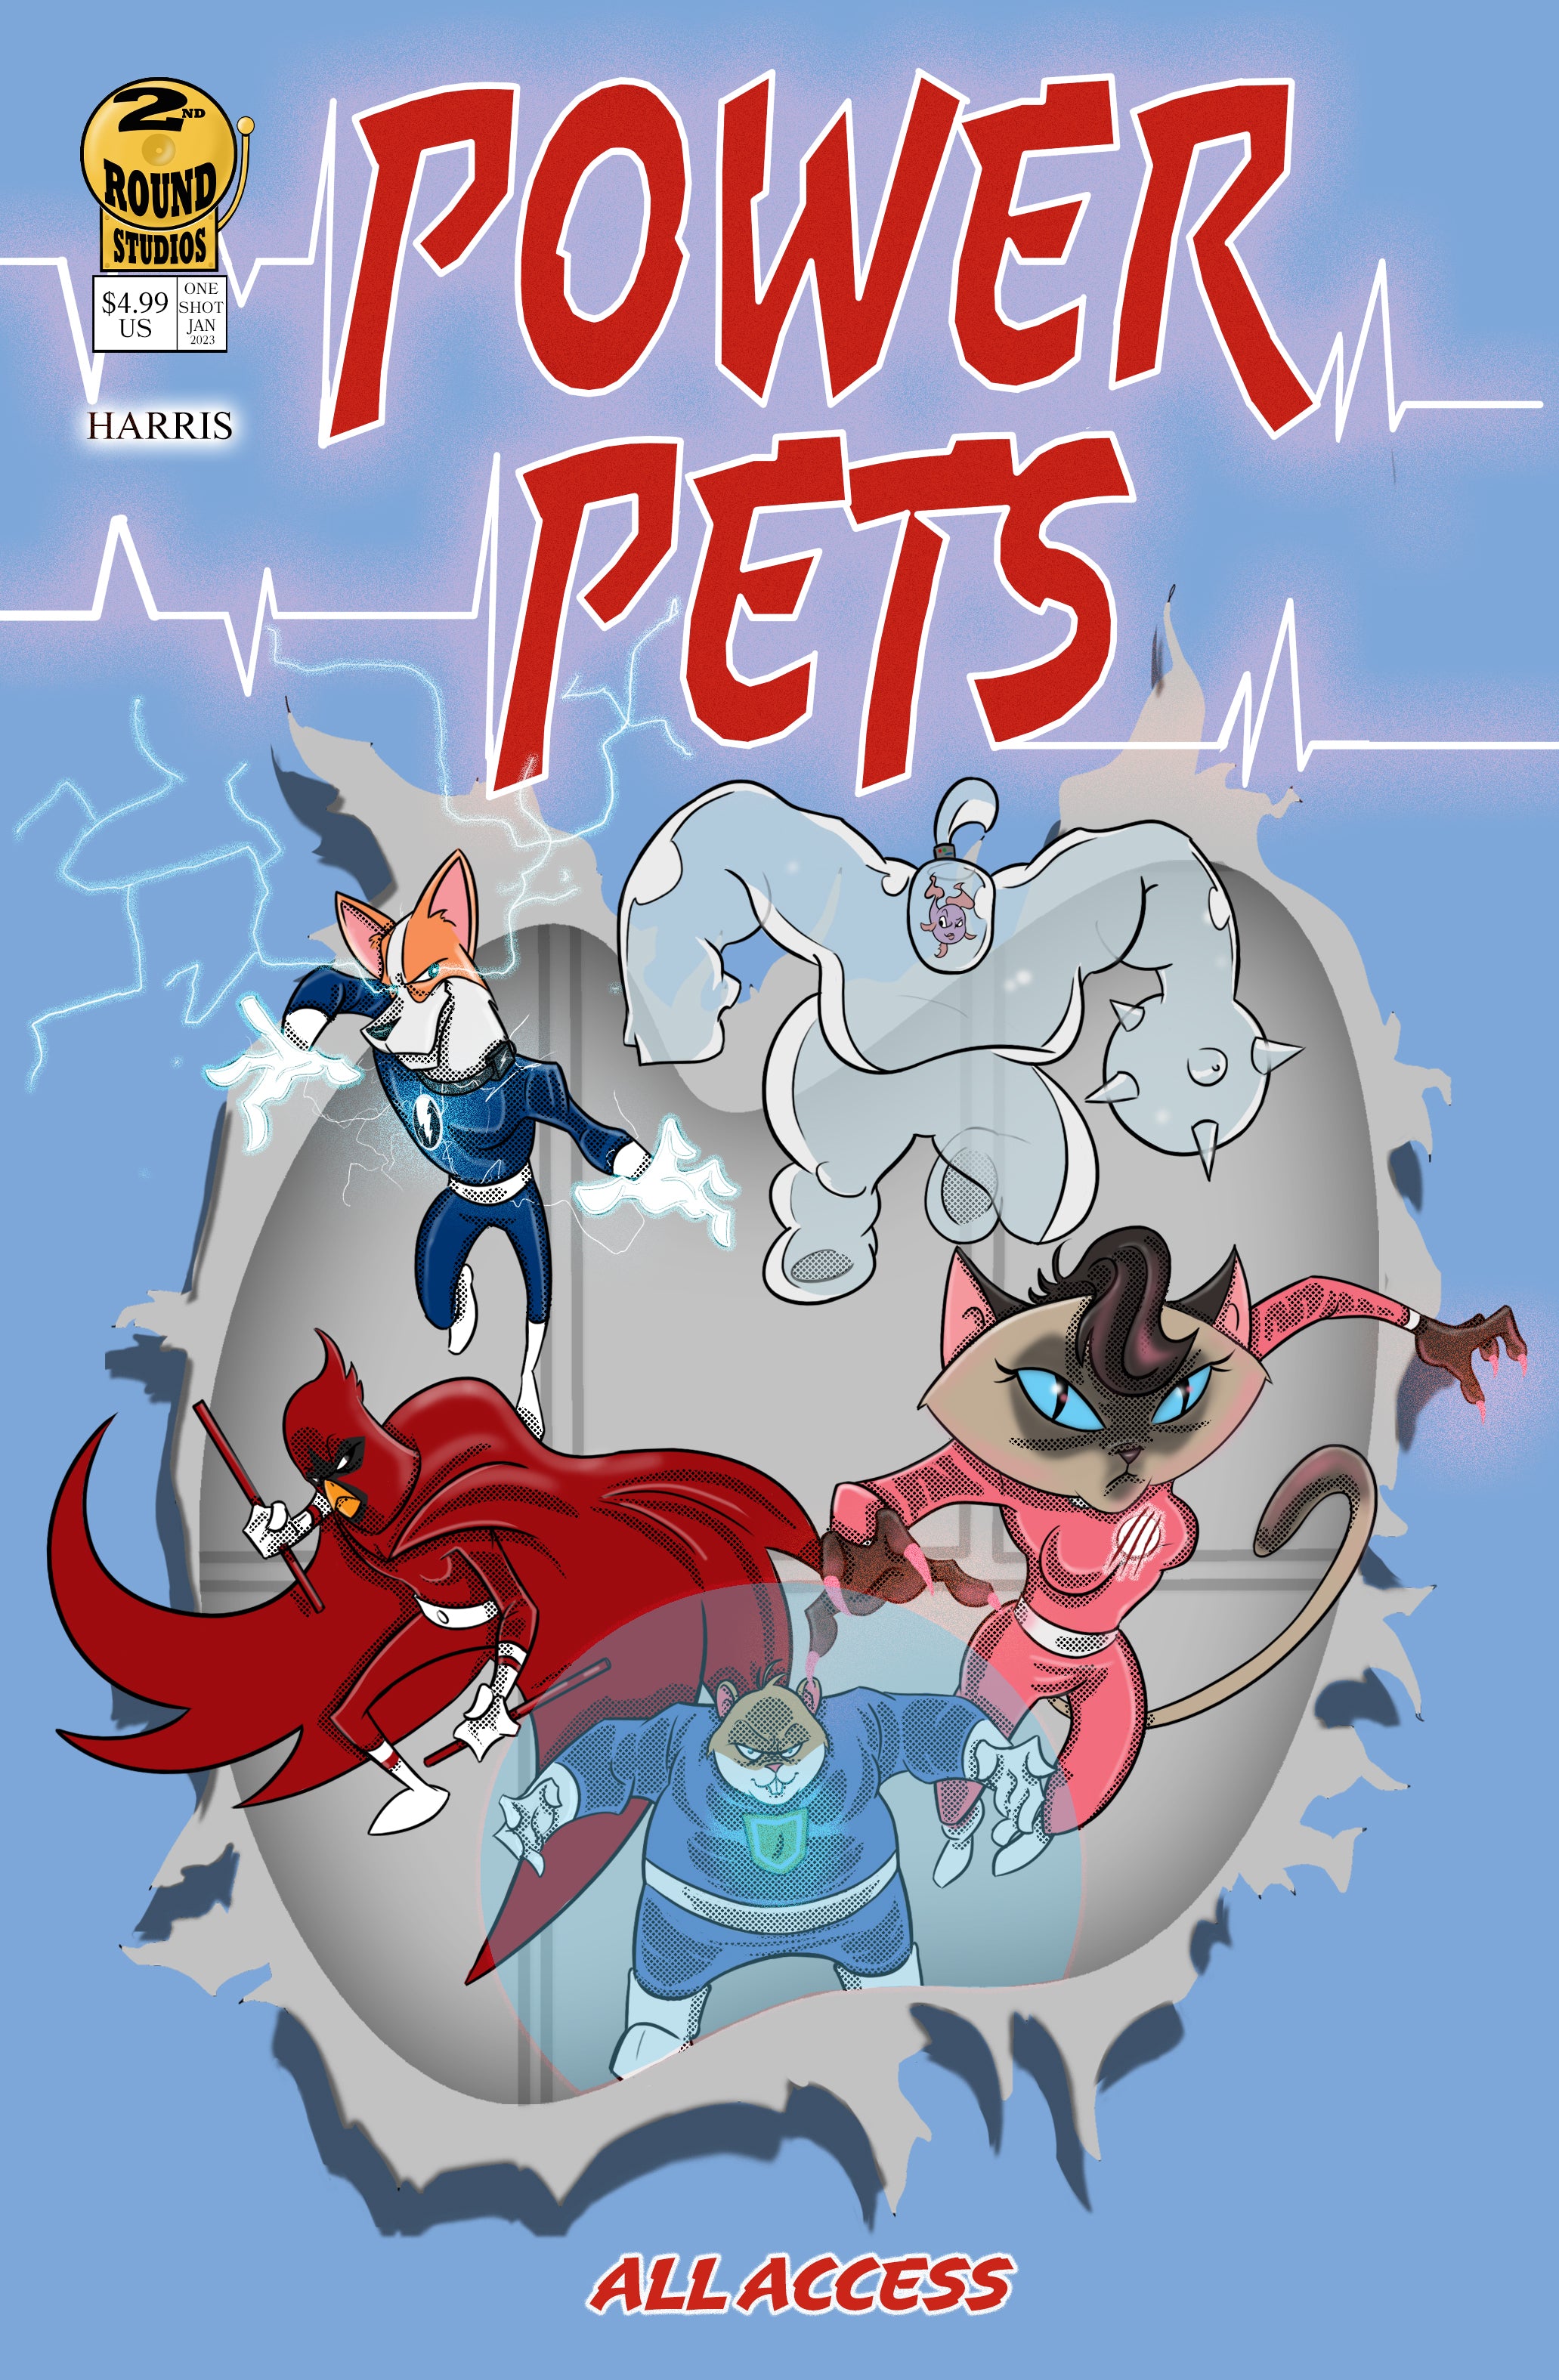 Comic book cover featuring the Power Pets, a group of superheroes